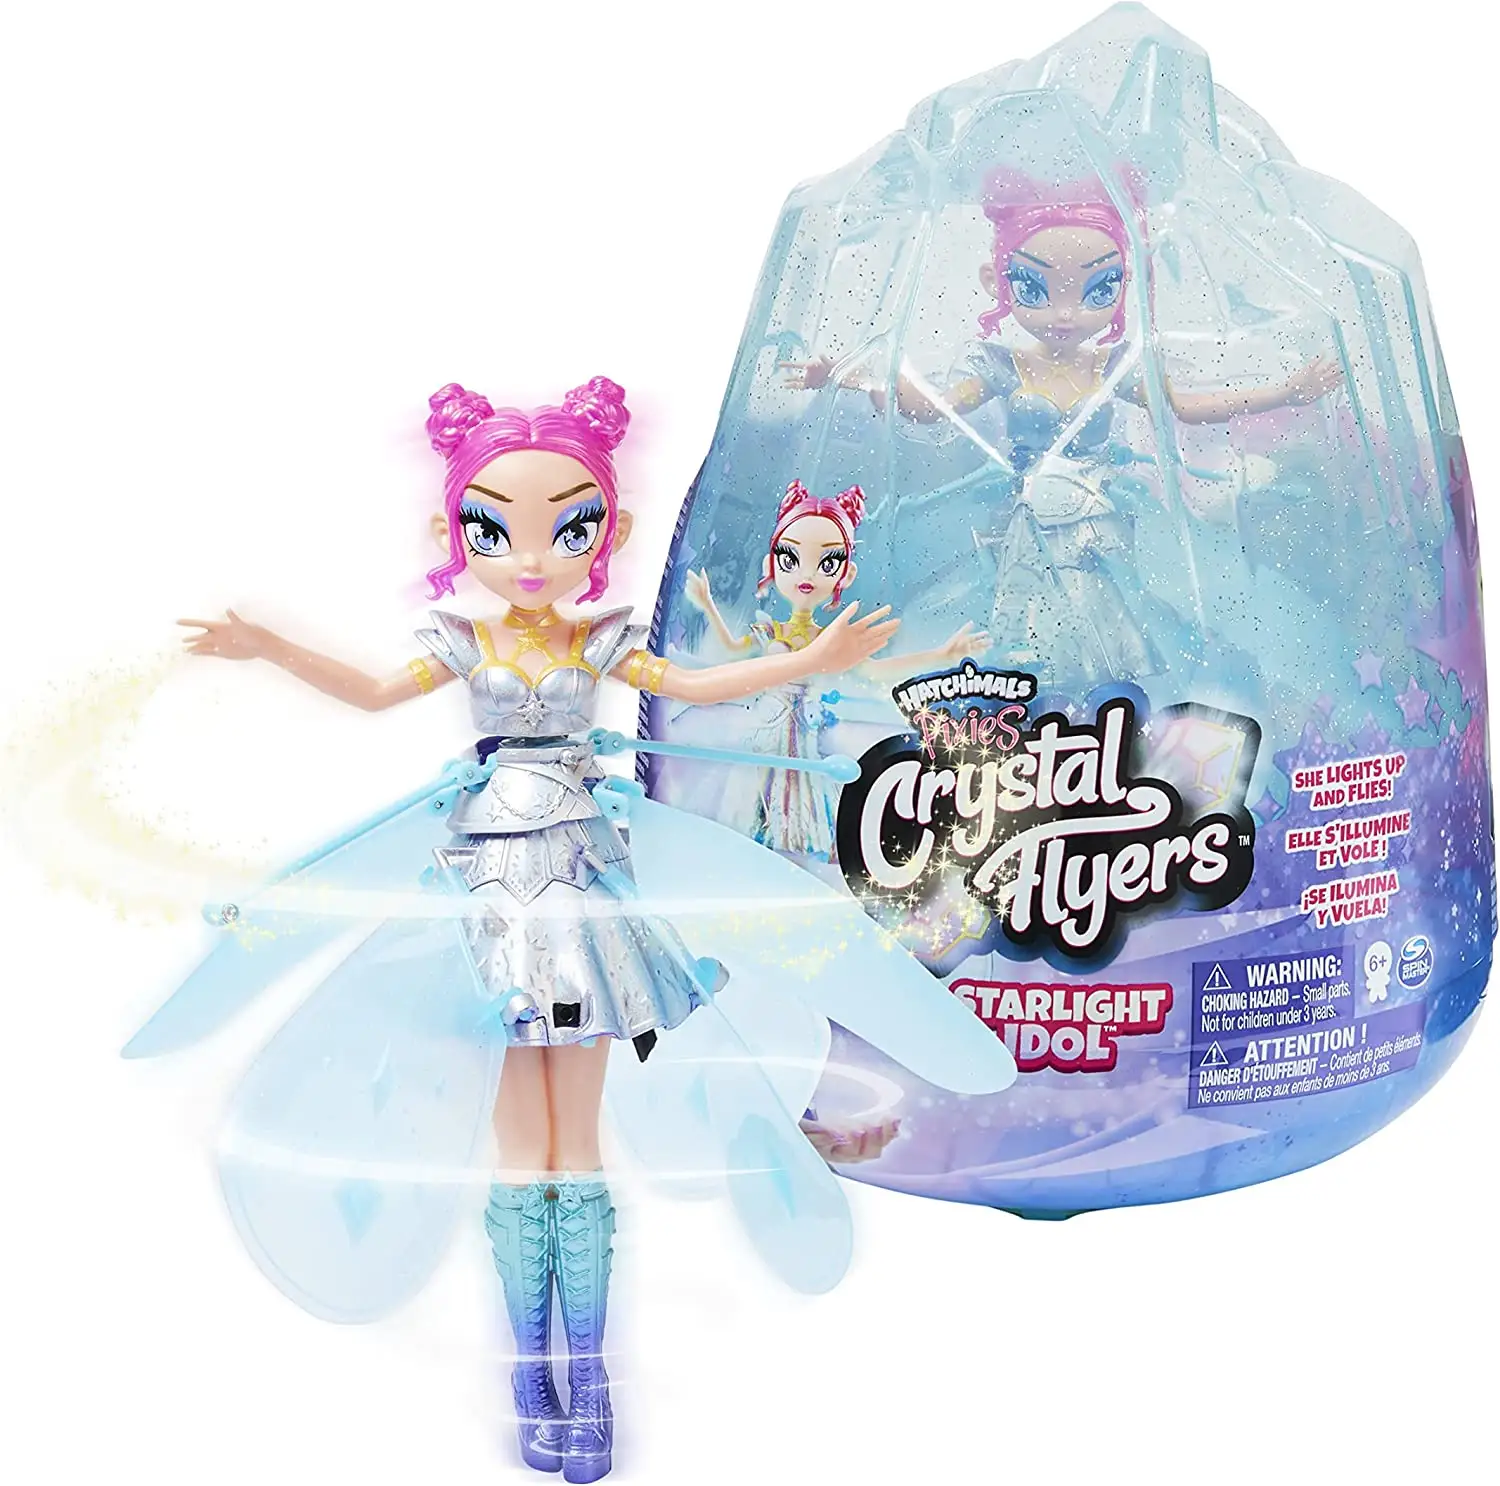 Super Discounted Price Hatchims Pixies, Crystal Flyers Starlight Idol Magical Flying Pixie Toy with Lights, Kids Toys for Girls